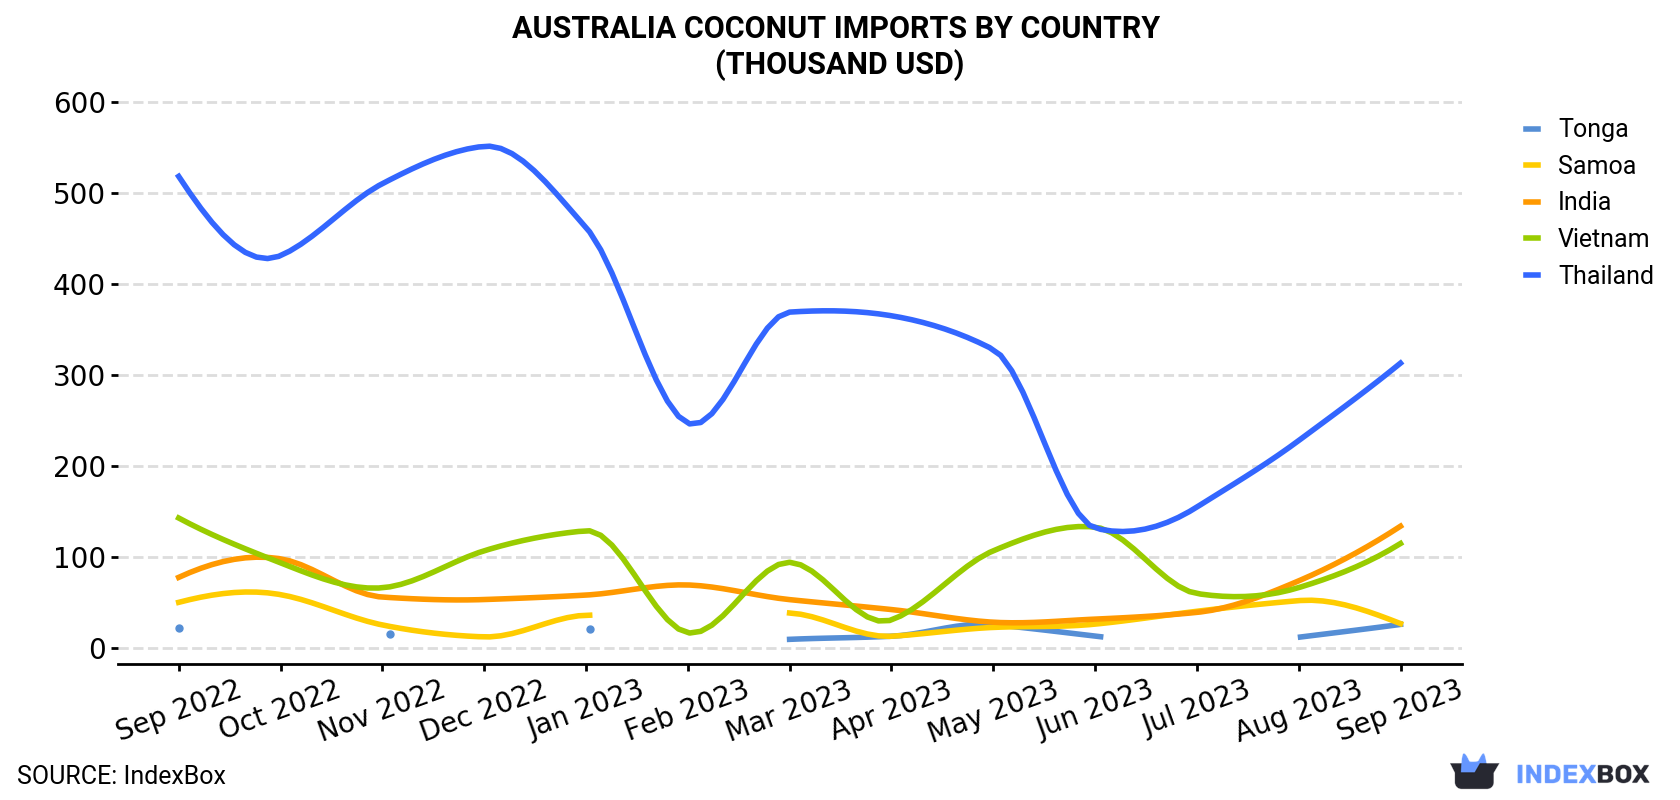 Australia Coconut Imports By Country (Thousand USD)